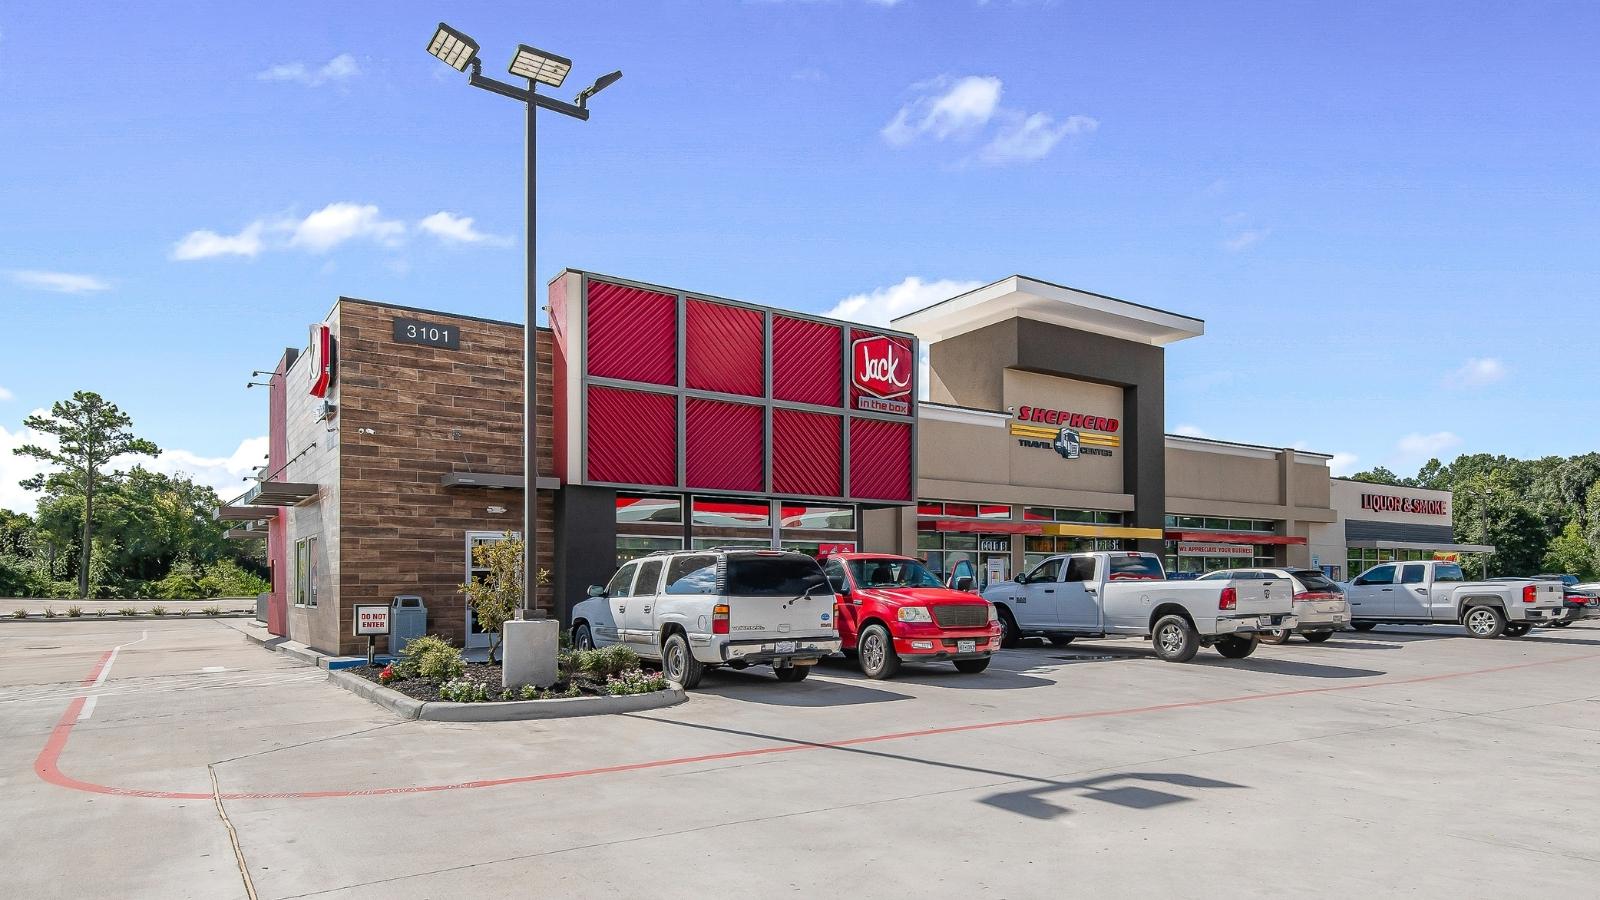 3 Reasons to Add Jack in the Box to Your Convenience Store